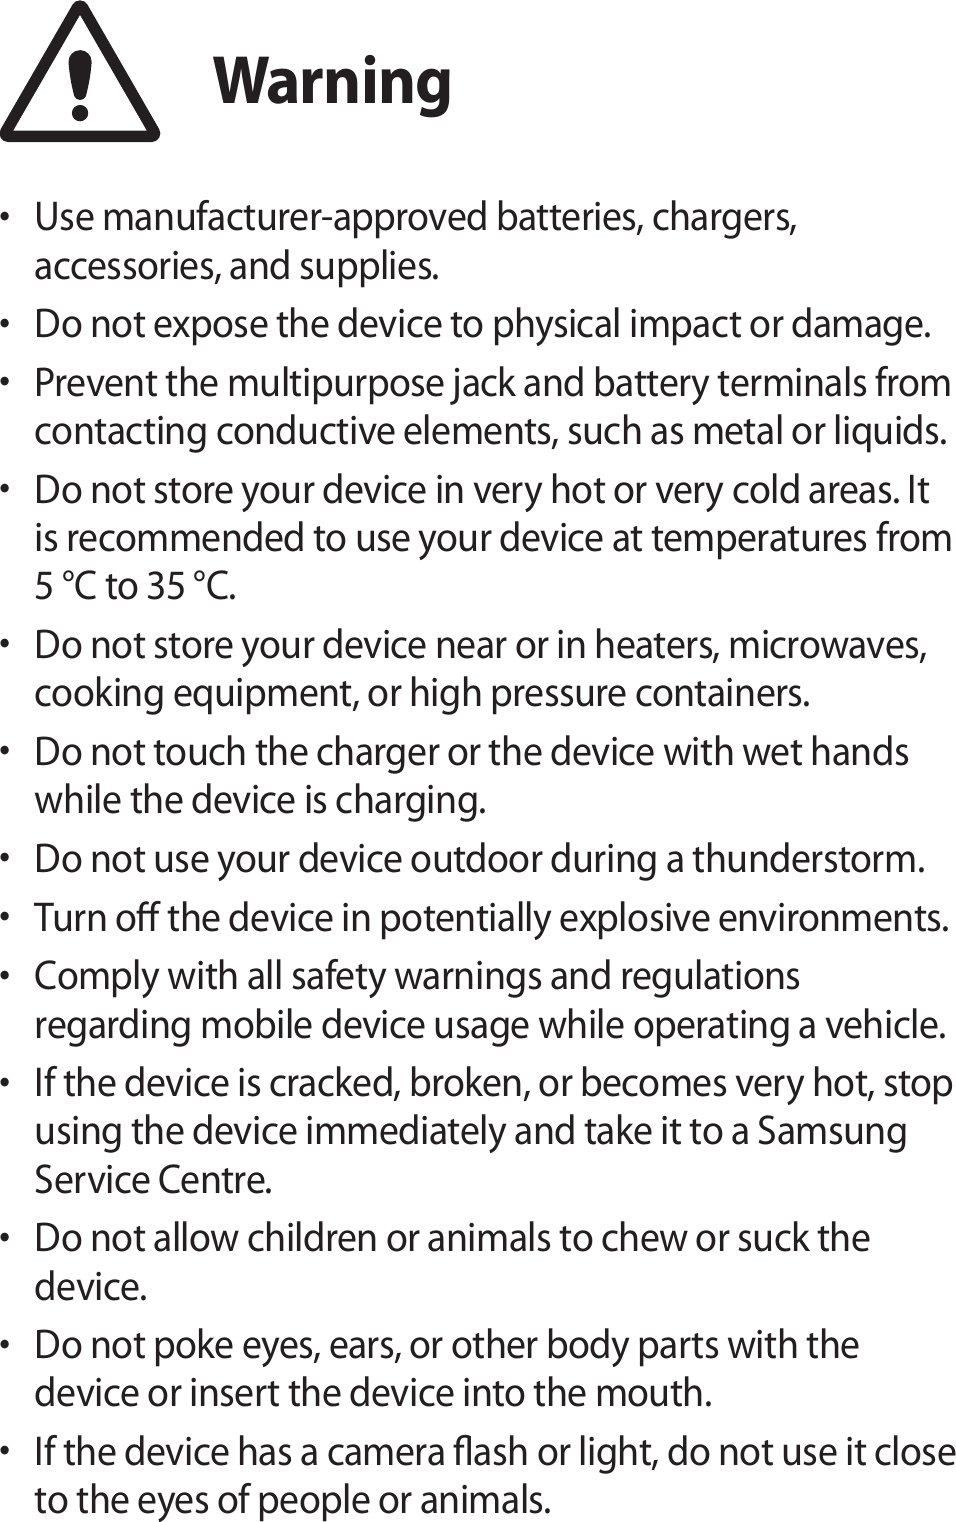 Warning• Use manufacturer-approved batteries, chargers, accessories, and supplies.• Do not expose the device to physical impact or damage.• Prevent the multipurpose jack and battery terminals from contacting conductive elements, such as metal or liquids.• Do not store your device in very hot or very cold areas. It is recommended to use your device at temperatures from 5 °C to 35 °C.• Do not store your device near or in heaters, microwaves, cooking equipment, or high pressure containers.• Do not touch the charger or the device with wet hands while the device is charging.• Do not use your device outdoor during a thunderstorm.• Turn o the device in potentially explosive environments.• Comply with all safety warnings and regulations regarding mobile device usage while operating a vehicle.• If the device is cracked, broken, or becomes very hot, stop using the device immediately and take it to a Samsung Service Centre.• Do not allow children or animals to chew or suck the device.• Do not poke eyes, ears, or other body parts with the device or insert the device into the mouth.• If the device has a camera ash or light, do not use it close to the eyes of people or animals.